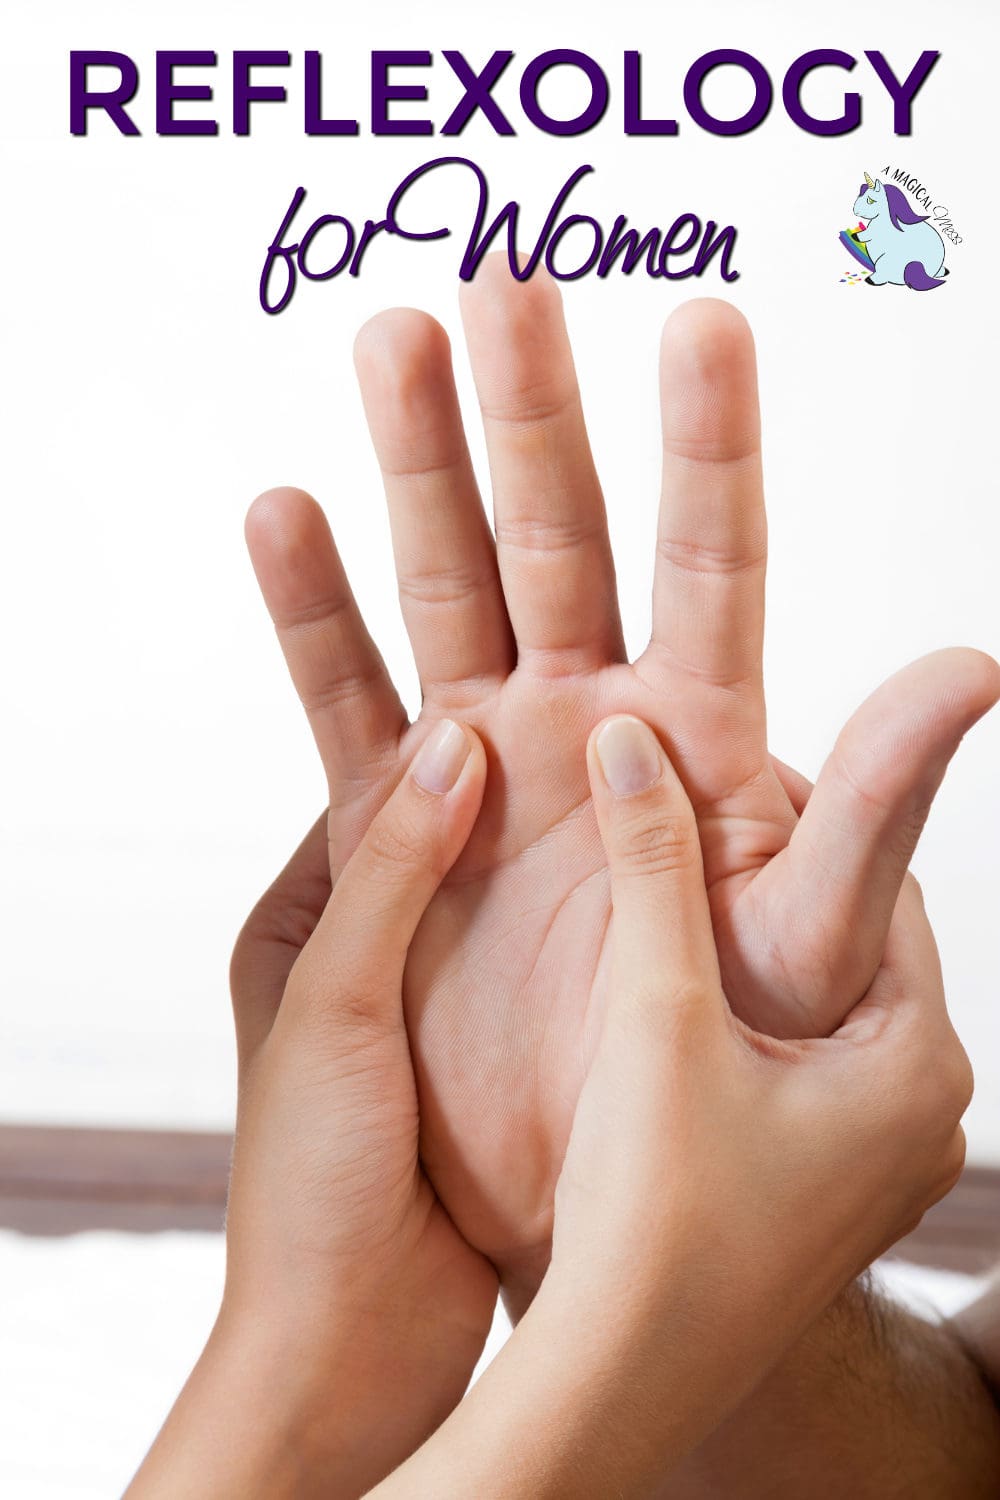 Simple Reflexology for Women to Try At Home